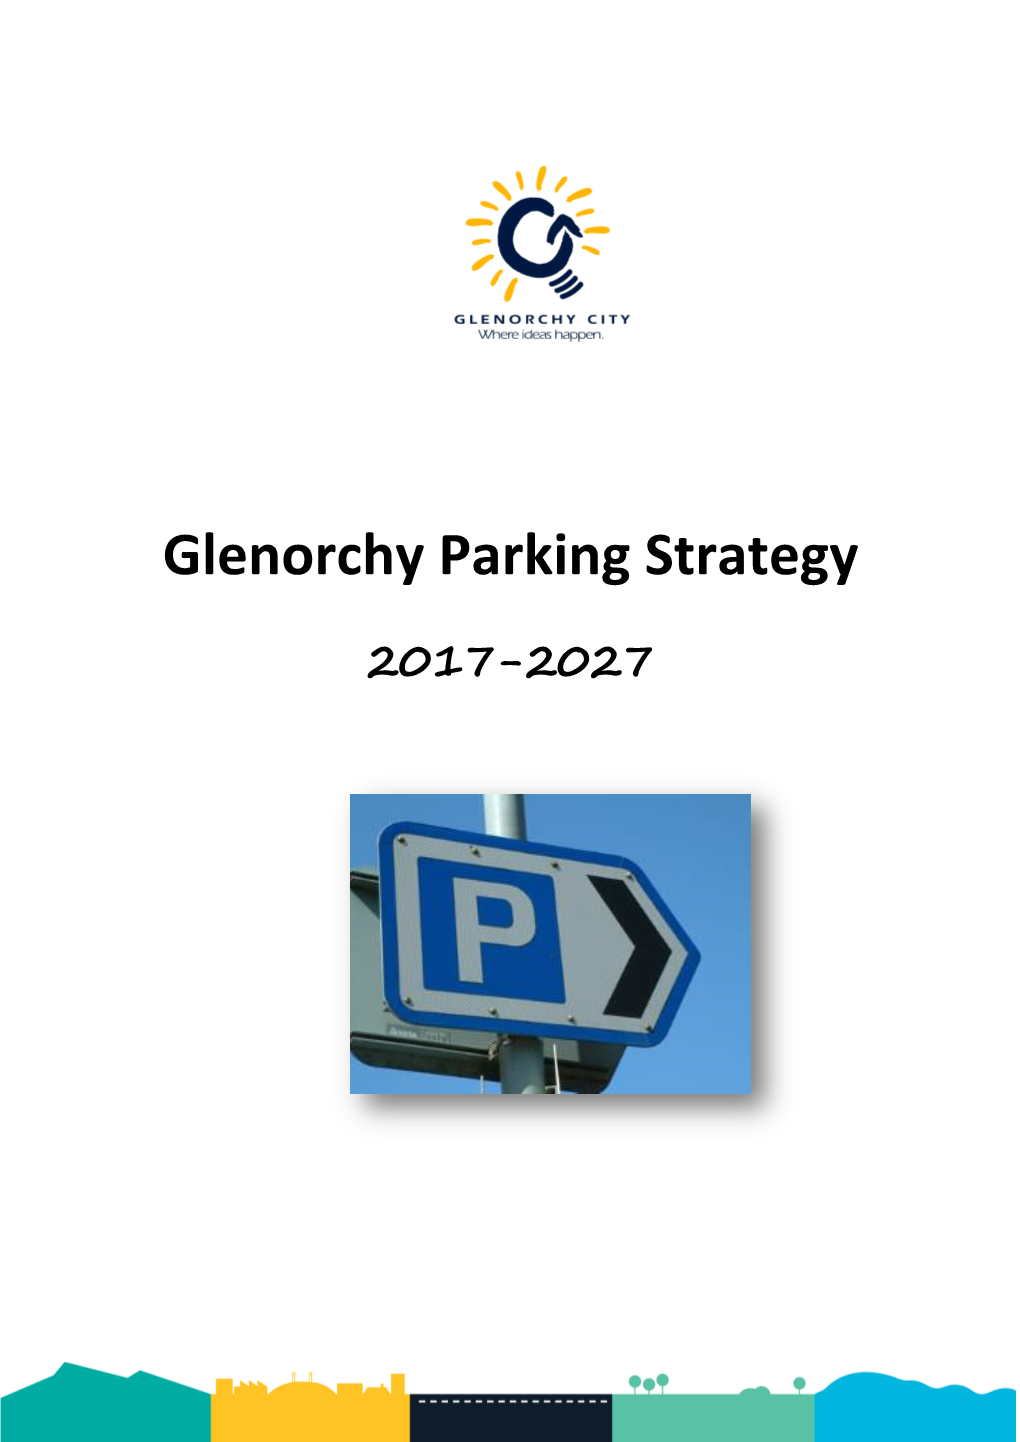 Glenorchy Parking Strategy 2017-2027 Was Finalised, to Include